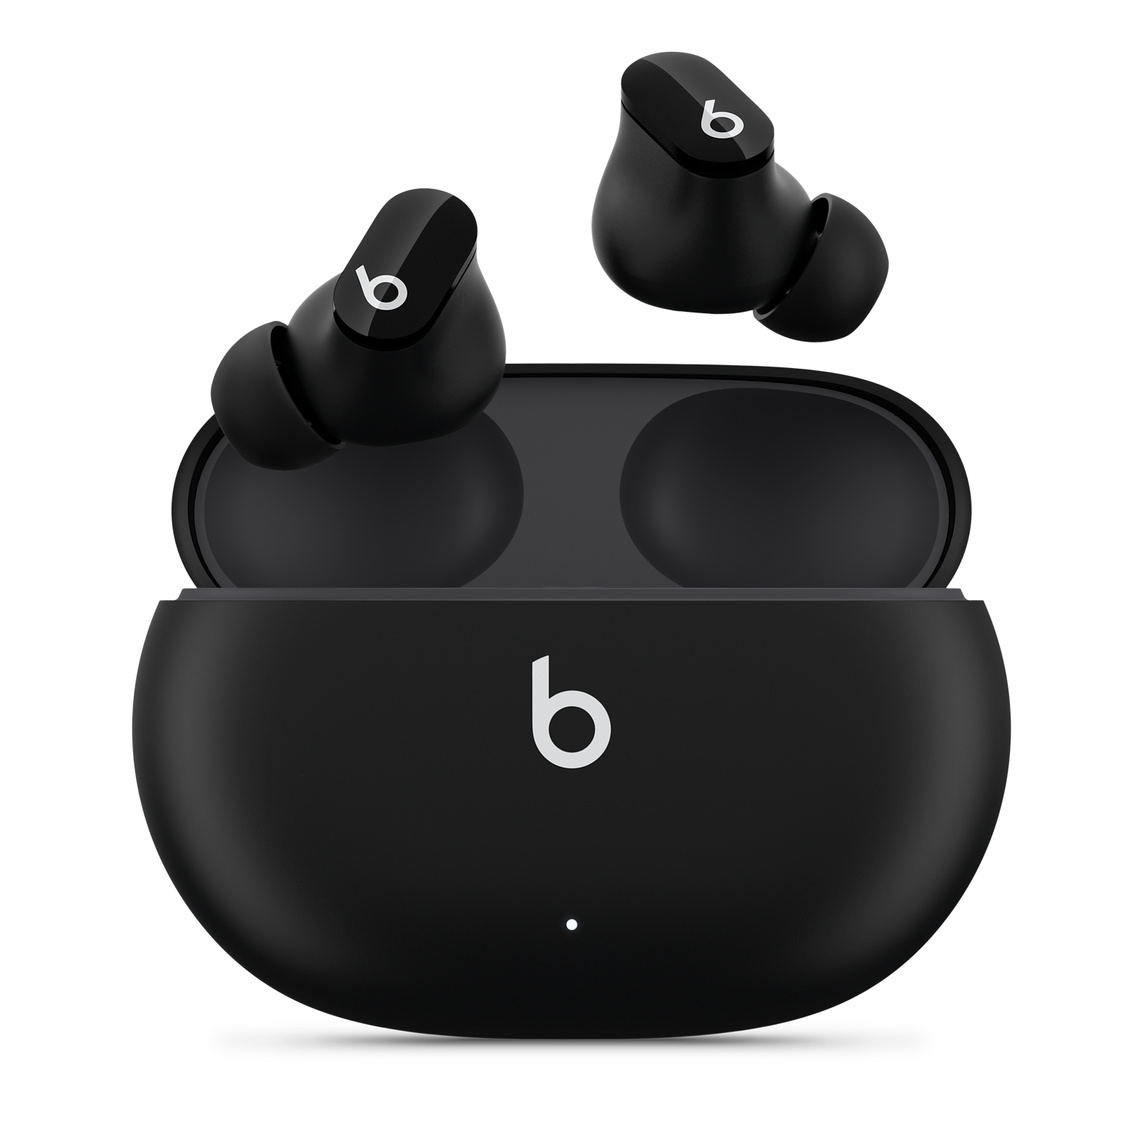 Beats Studio Buds True Wireless Noise Cancelling Earphones in Black, with Beats logo, above convenient charging case.